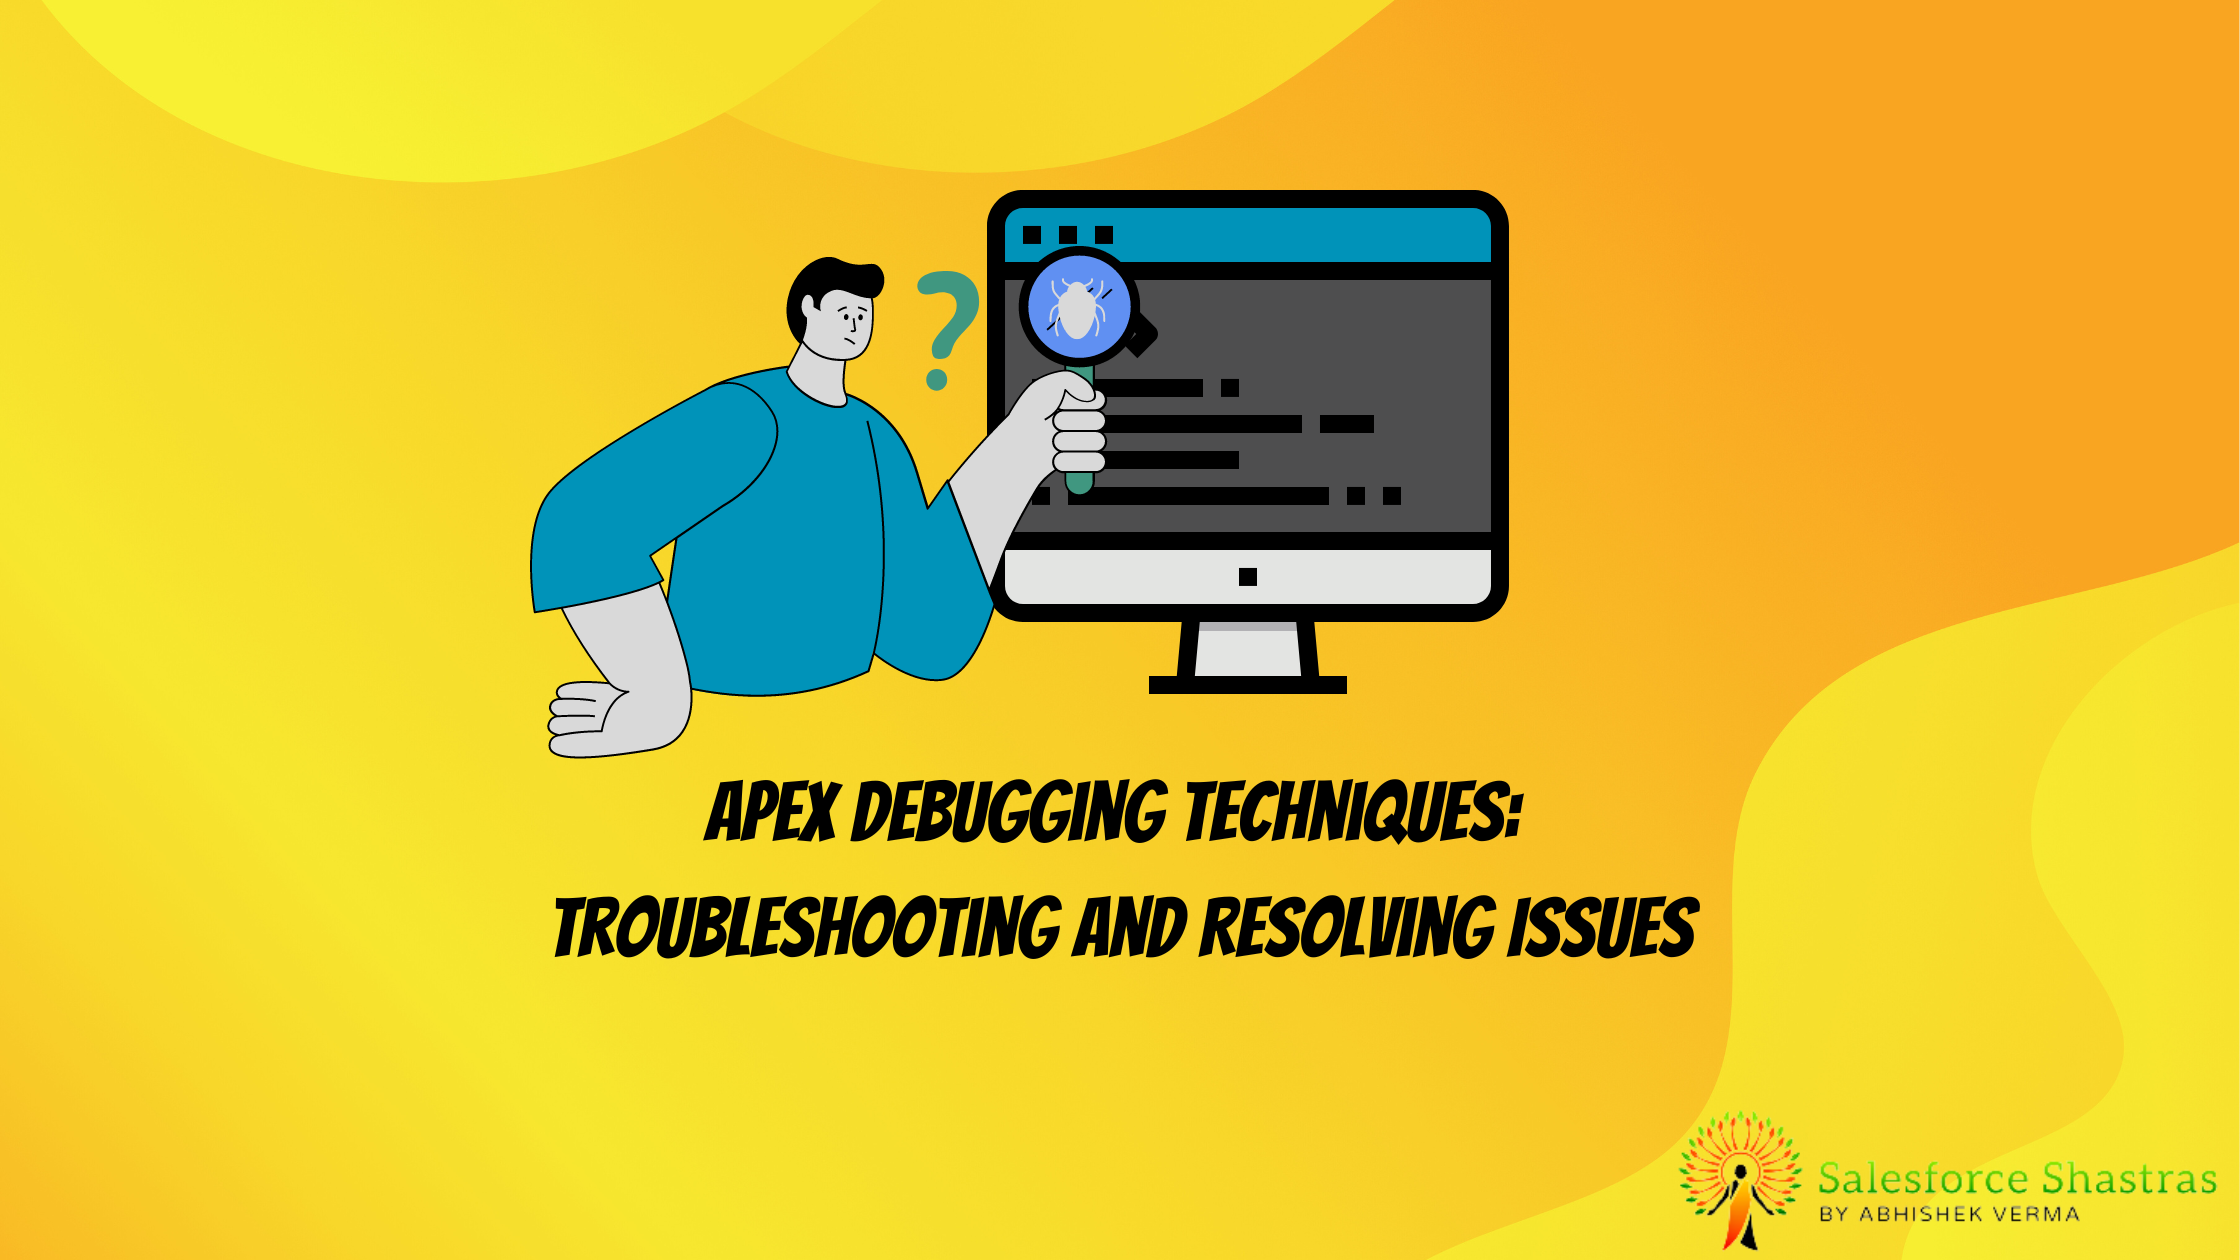 Apex Debugging Techniques: Troubleshooting and Resolving Issues